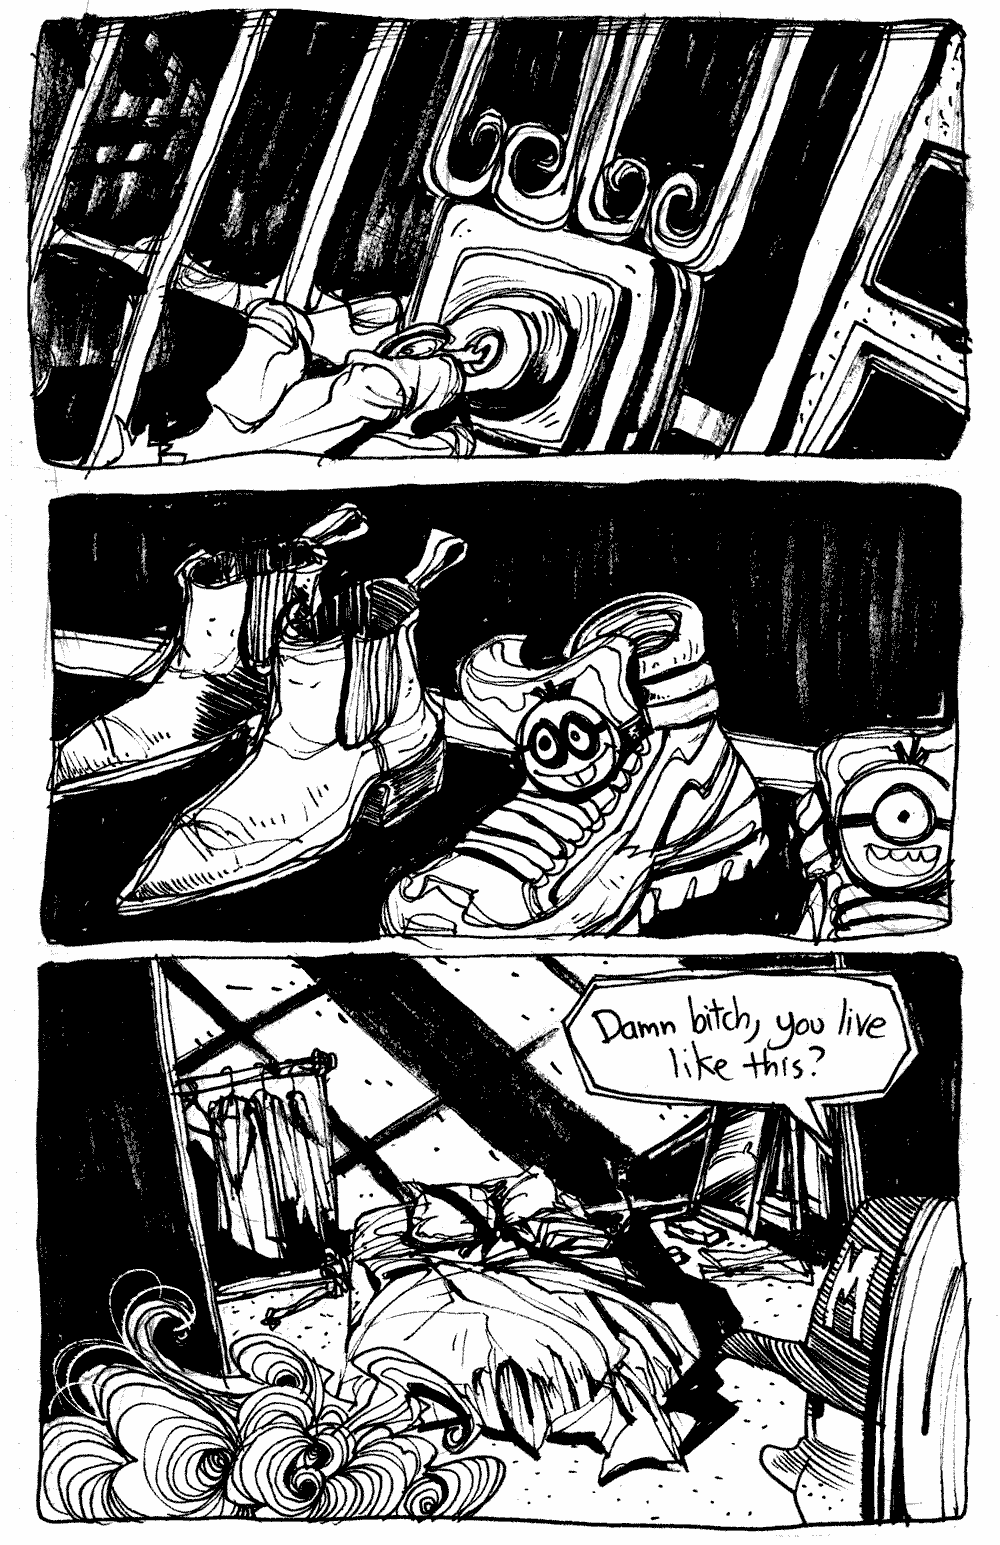 Page 25 - A key opens a door.  Shots of their shoes - one pair of pointed chelsea boots, and one pair of minion sneakers.  We see Basile's messy room, with mattress on te floor and fabric strewn around everywhere.  'Damn bitch, you live like this?' says Ollie.